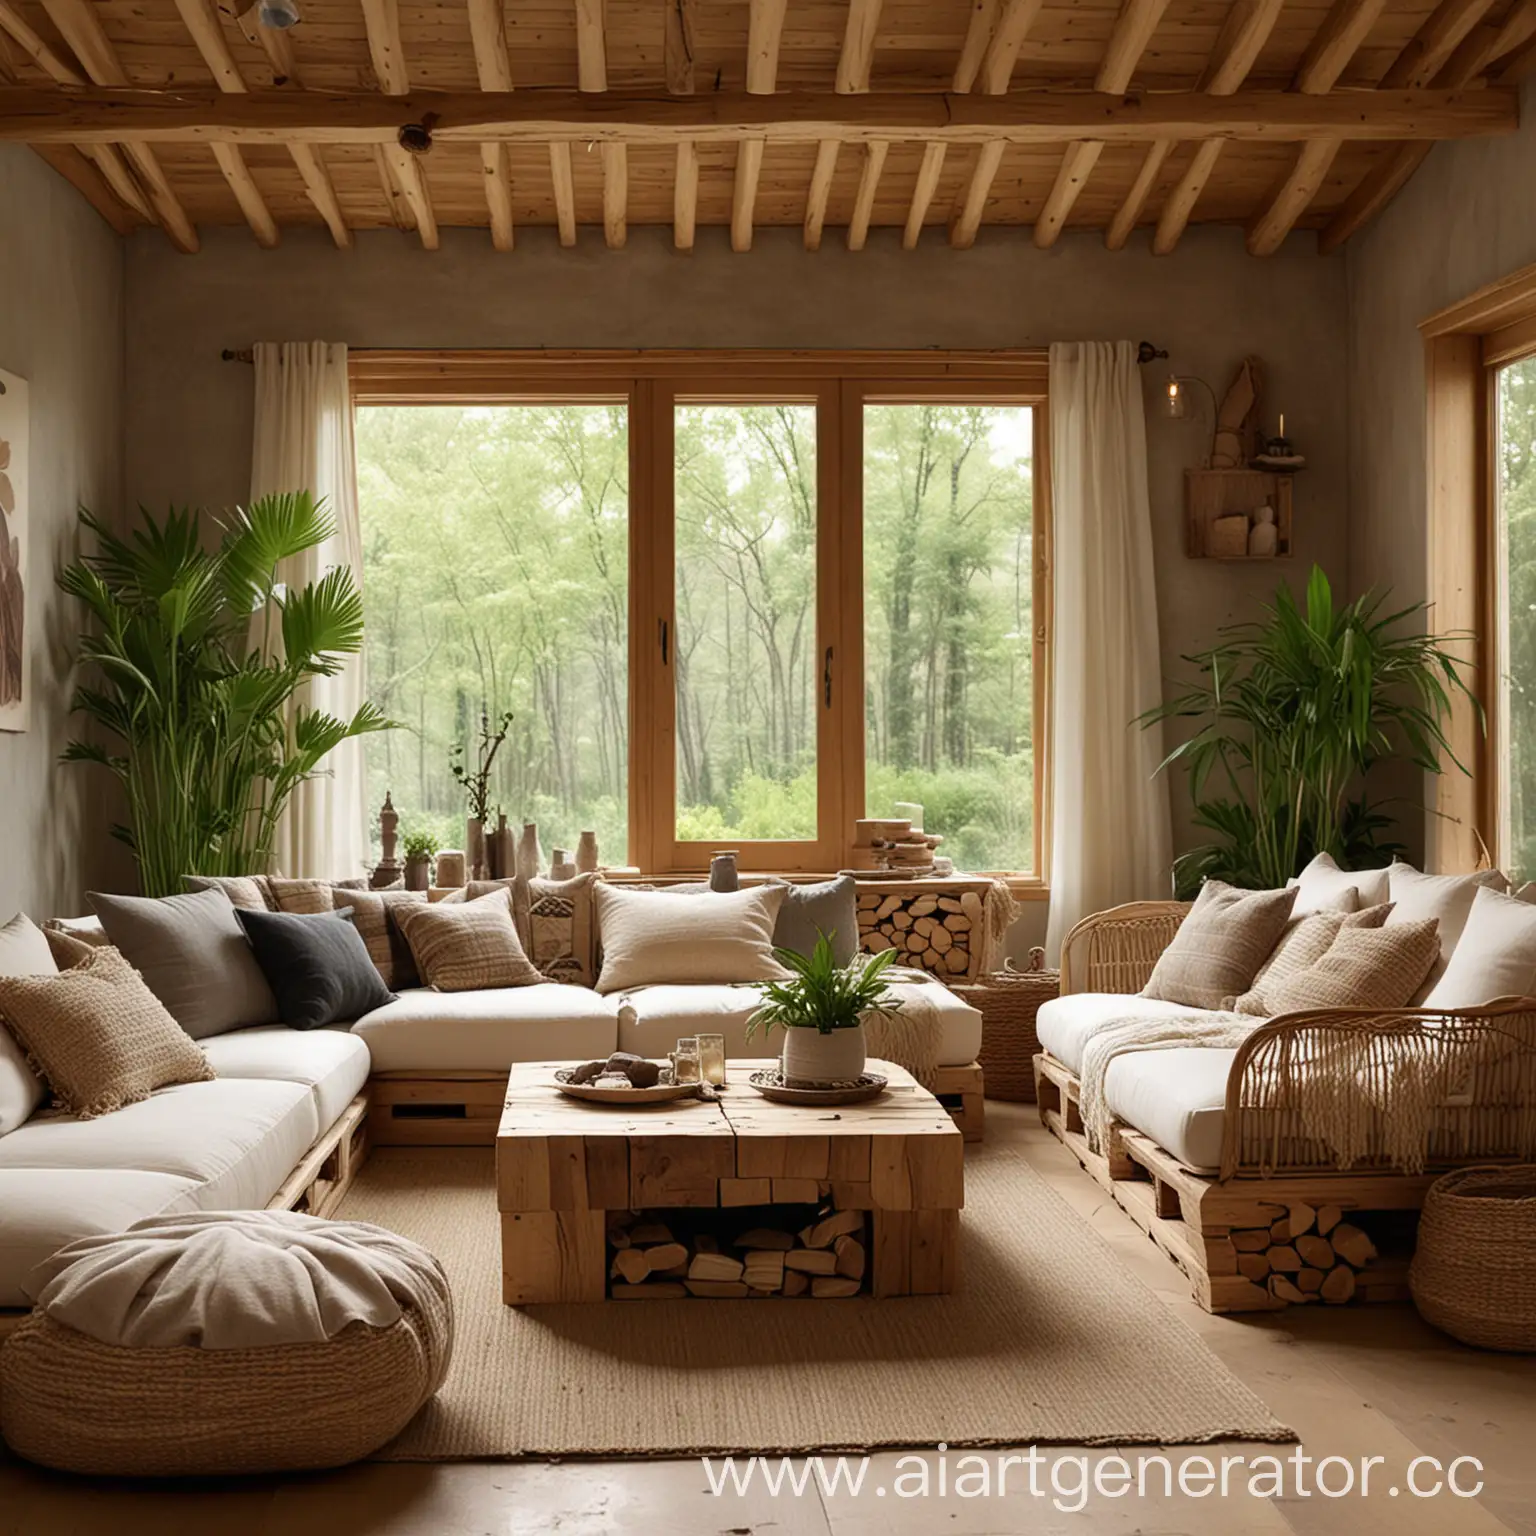 An eco-style living room is a space with natural materials, natural shades and decor elements that create a cozy and calm atmosphere. It can use wood, stone, plants, textiles made of natural fibers. Furniture can be made of eco-friendly materials such as wood, rattan or bamboo. There can be a cozy fireplace or an eco stove in the center of the room. Accents can be made in the form of textile cushions, plaids, decor items made of natural materials.